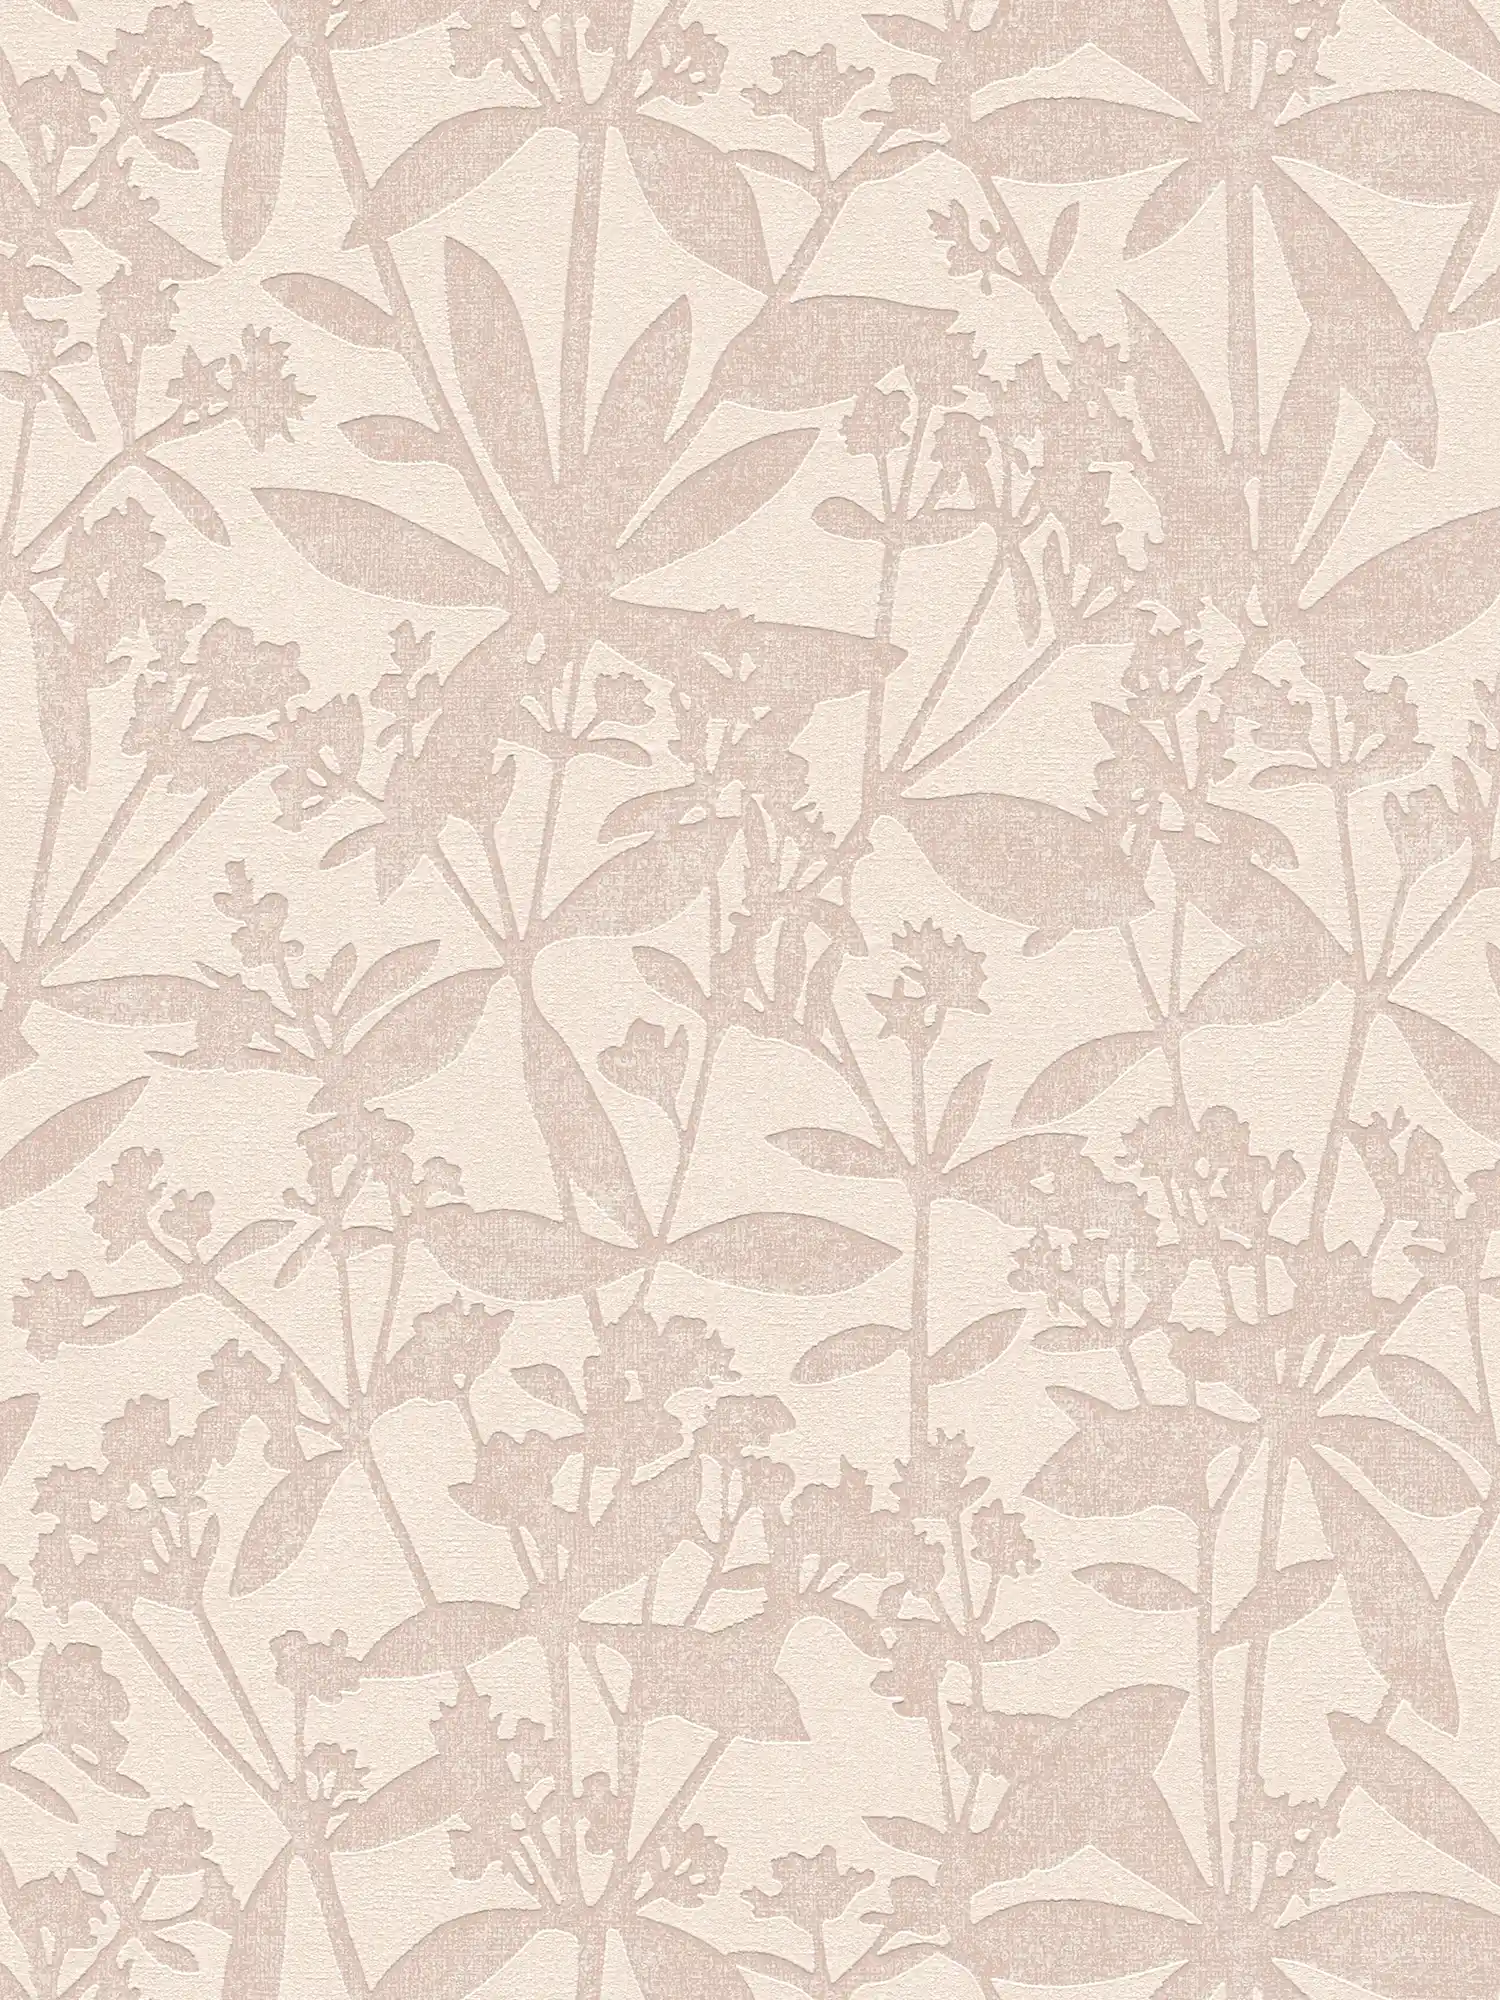 Non-woven wallpaper floral flowers and leaves - cream, beige
